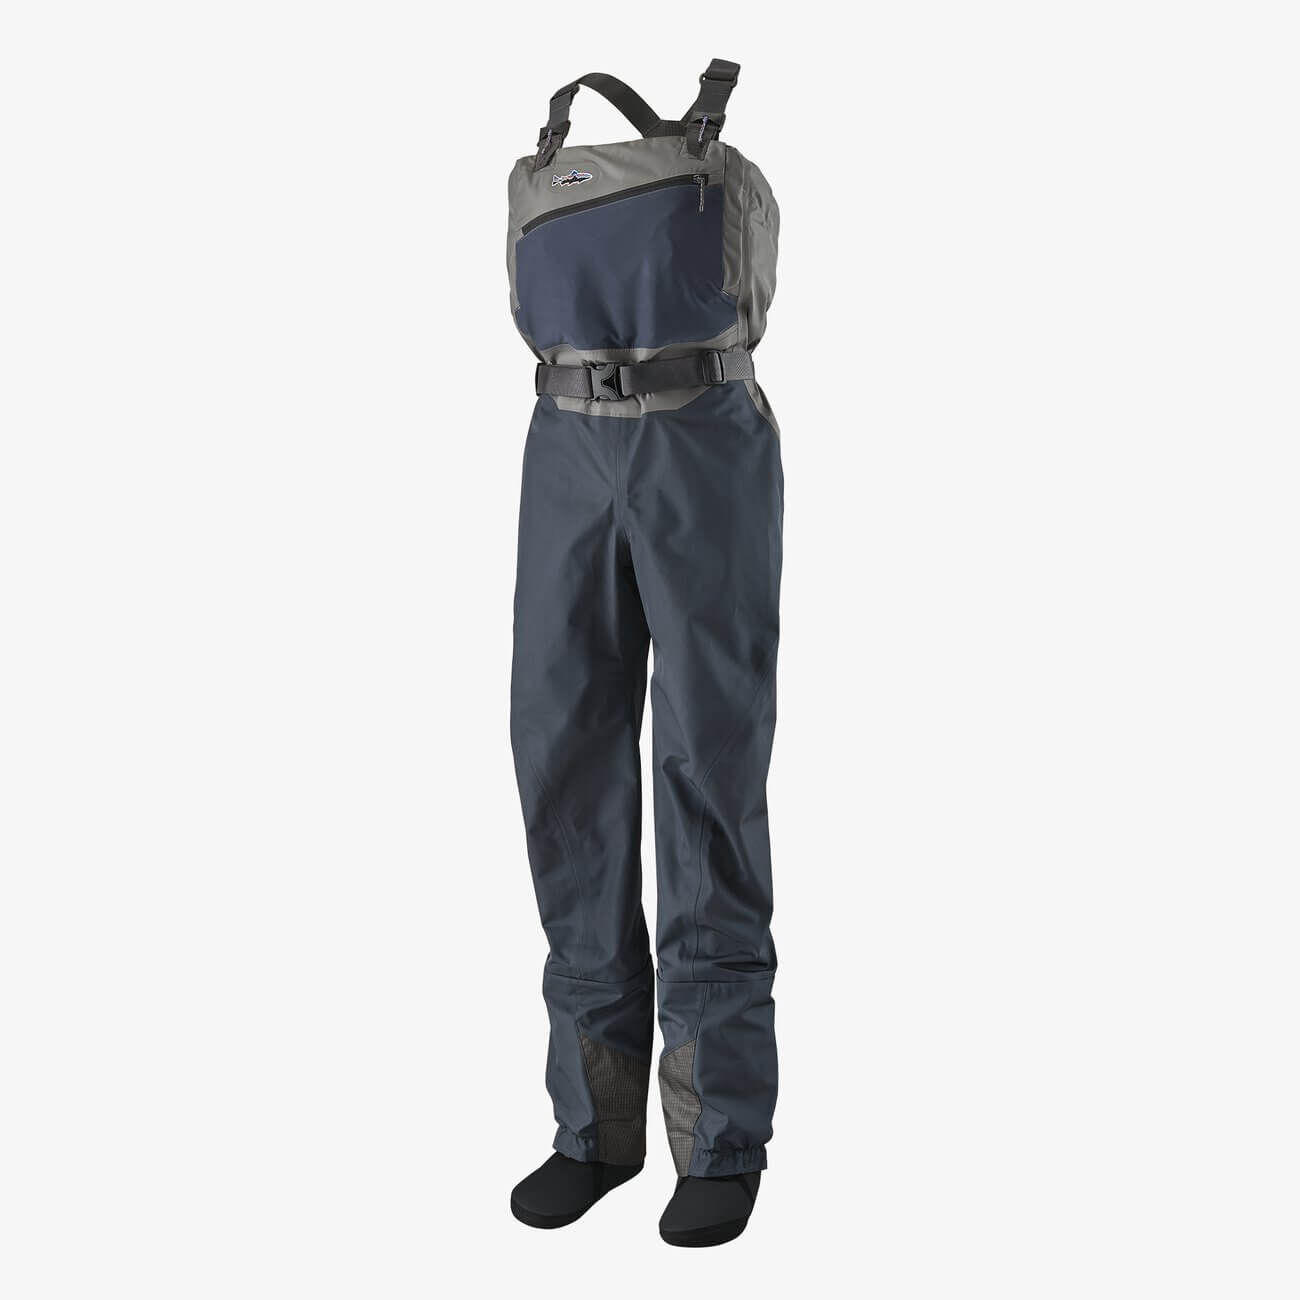 Patagonia Women's Swiftcurrent Waders 2020 - SRM (Small Reg)